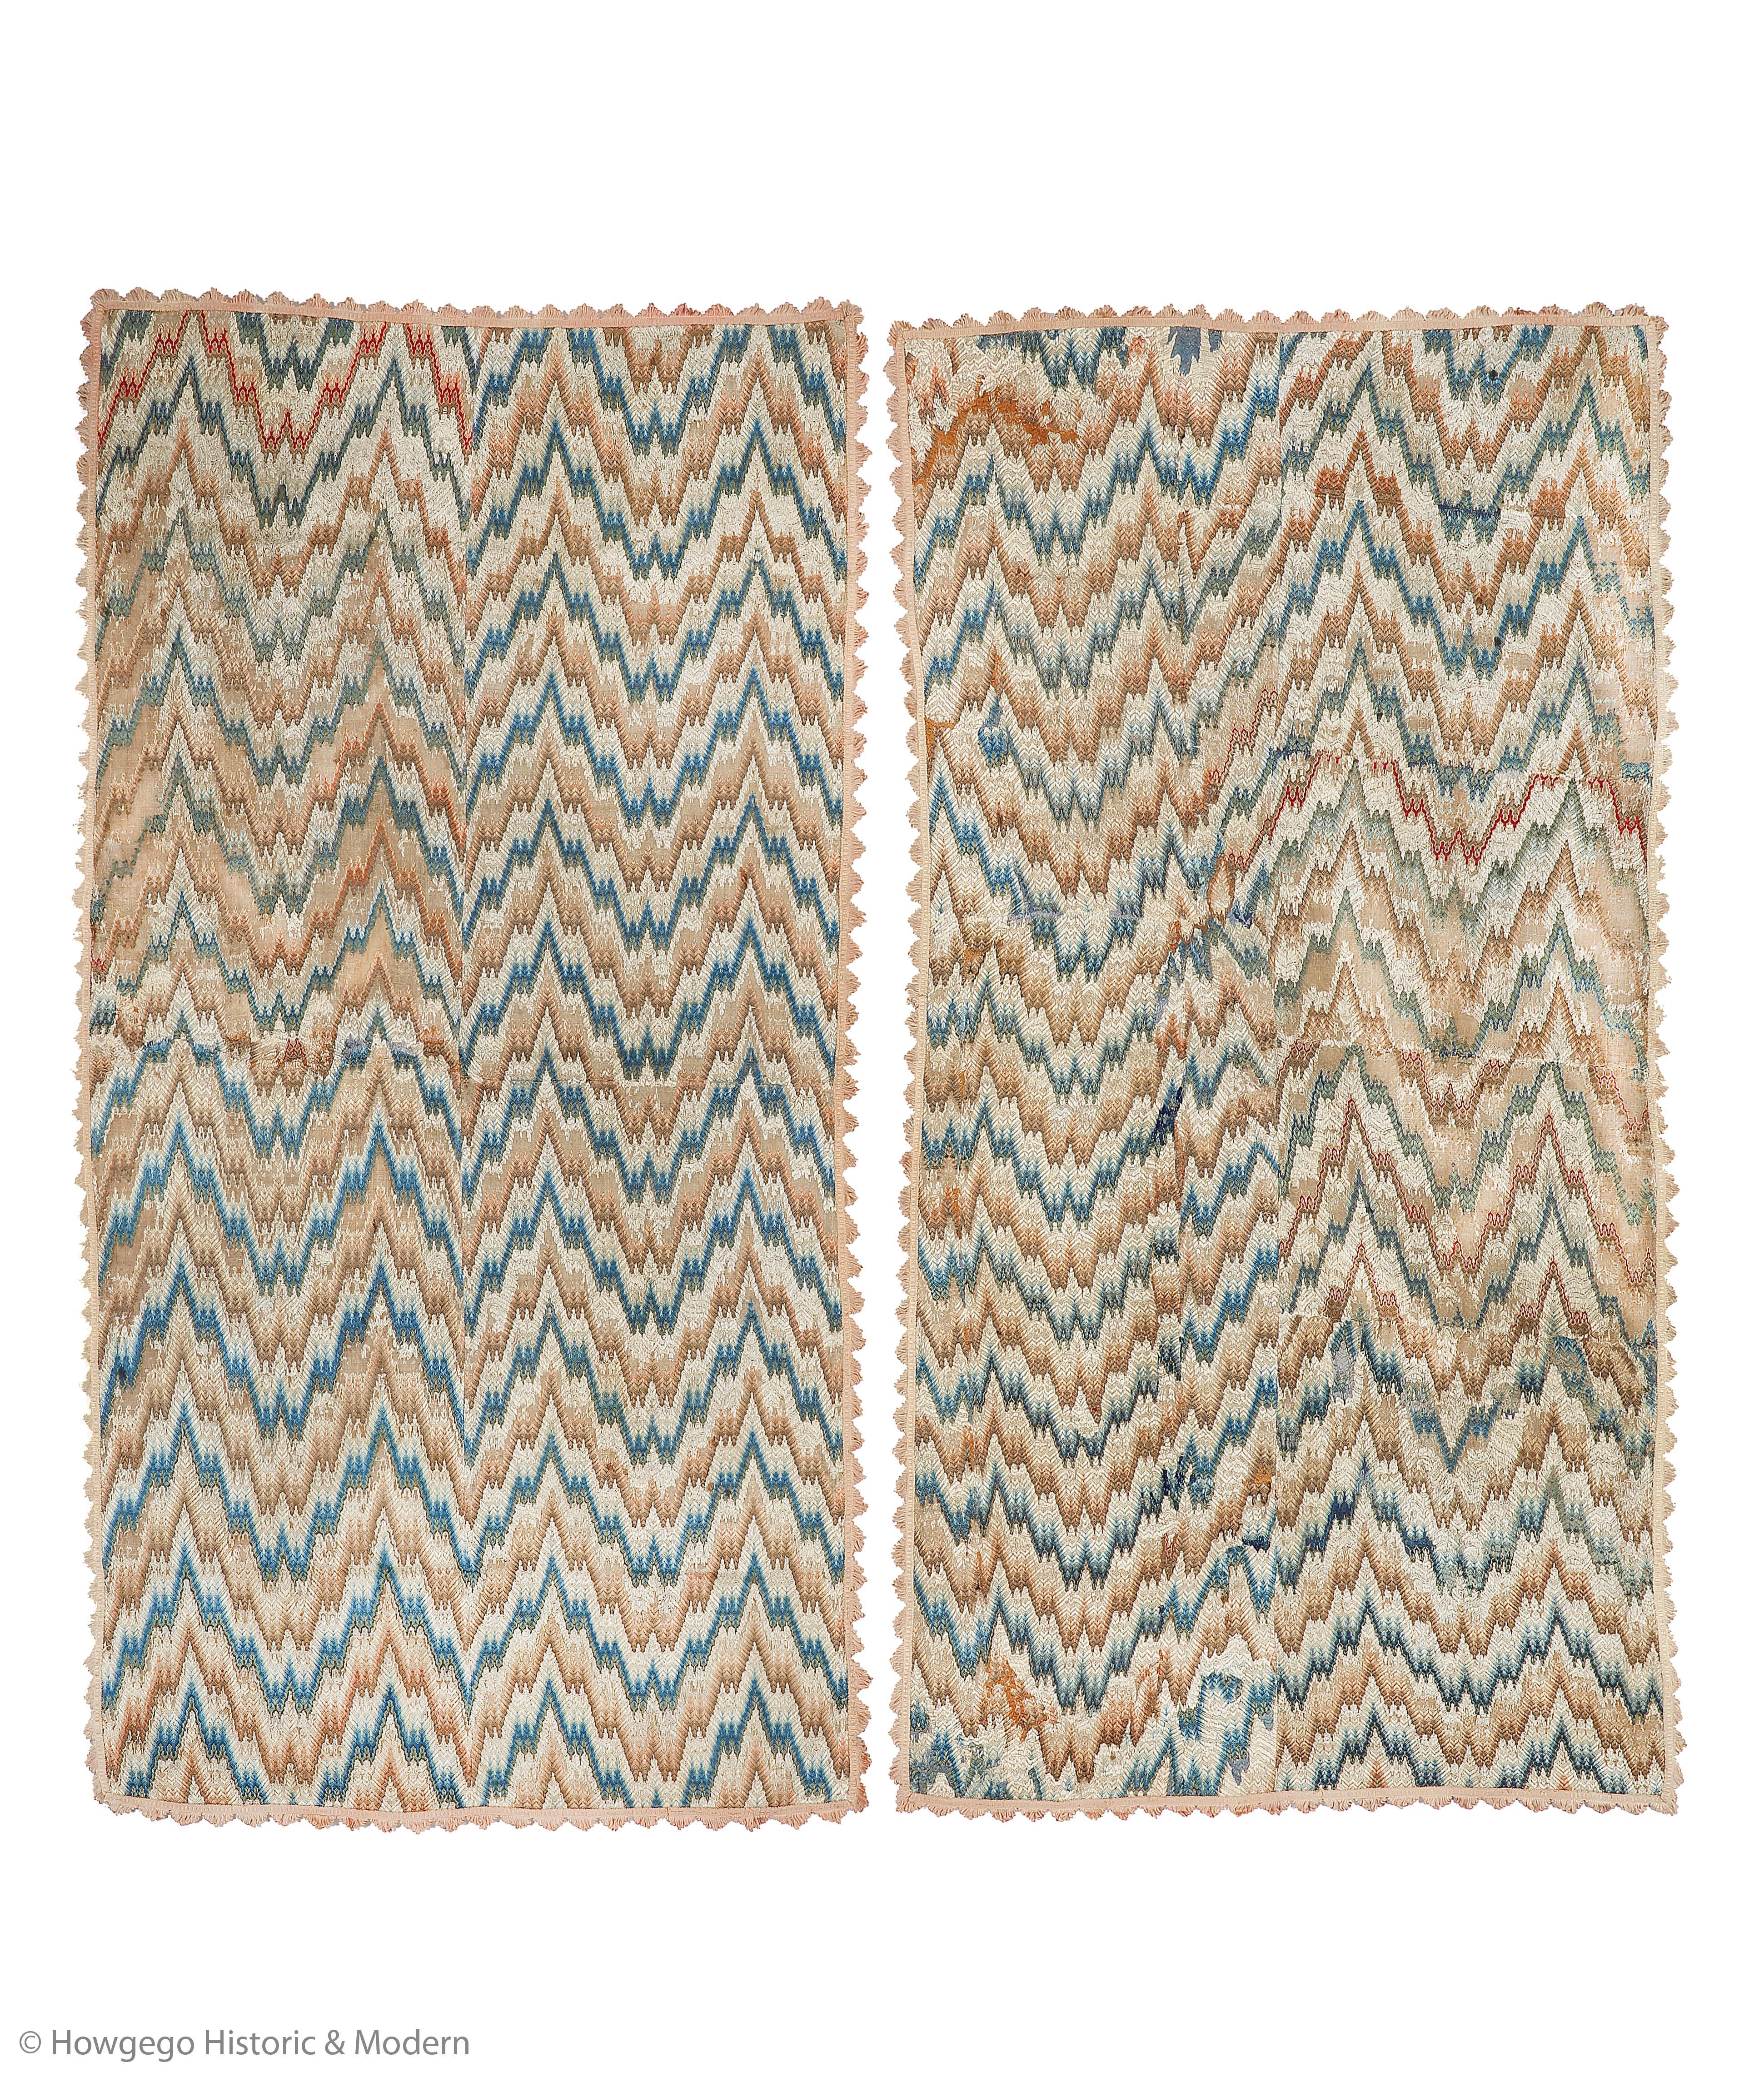 Spetchley park, Bargello, silk, bed curtains adapted into wall hangings in the 19th century

• The use of silk, patterning and size suggests that these striking Bargello hangings were almost certainly conceived as bed curtains. In the Green